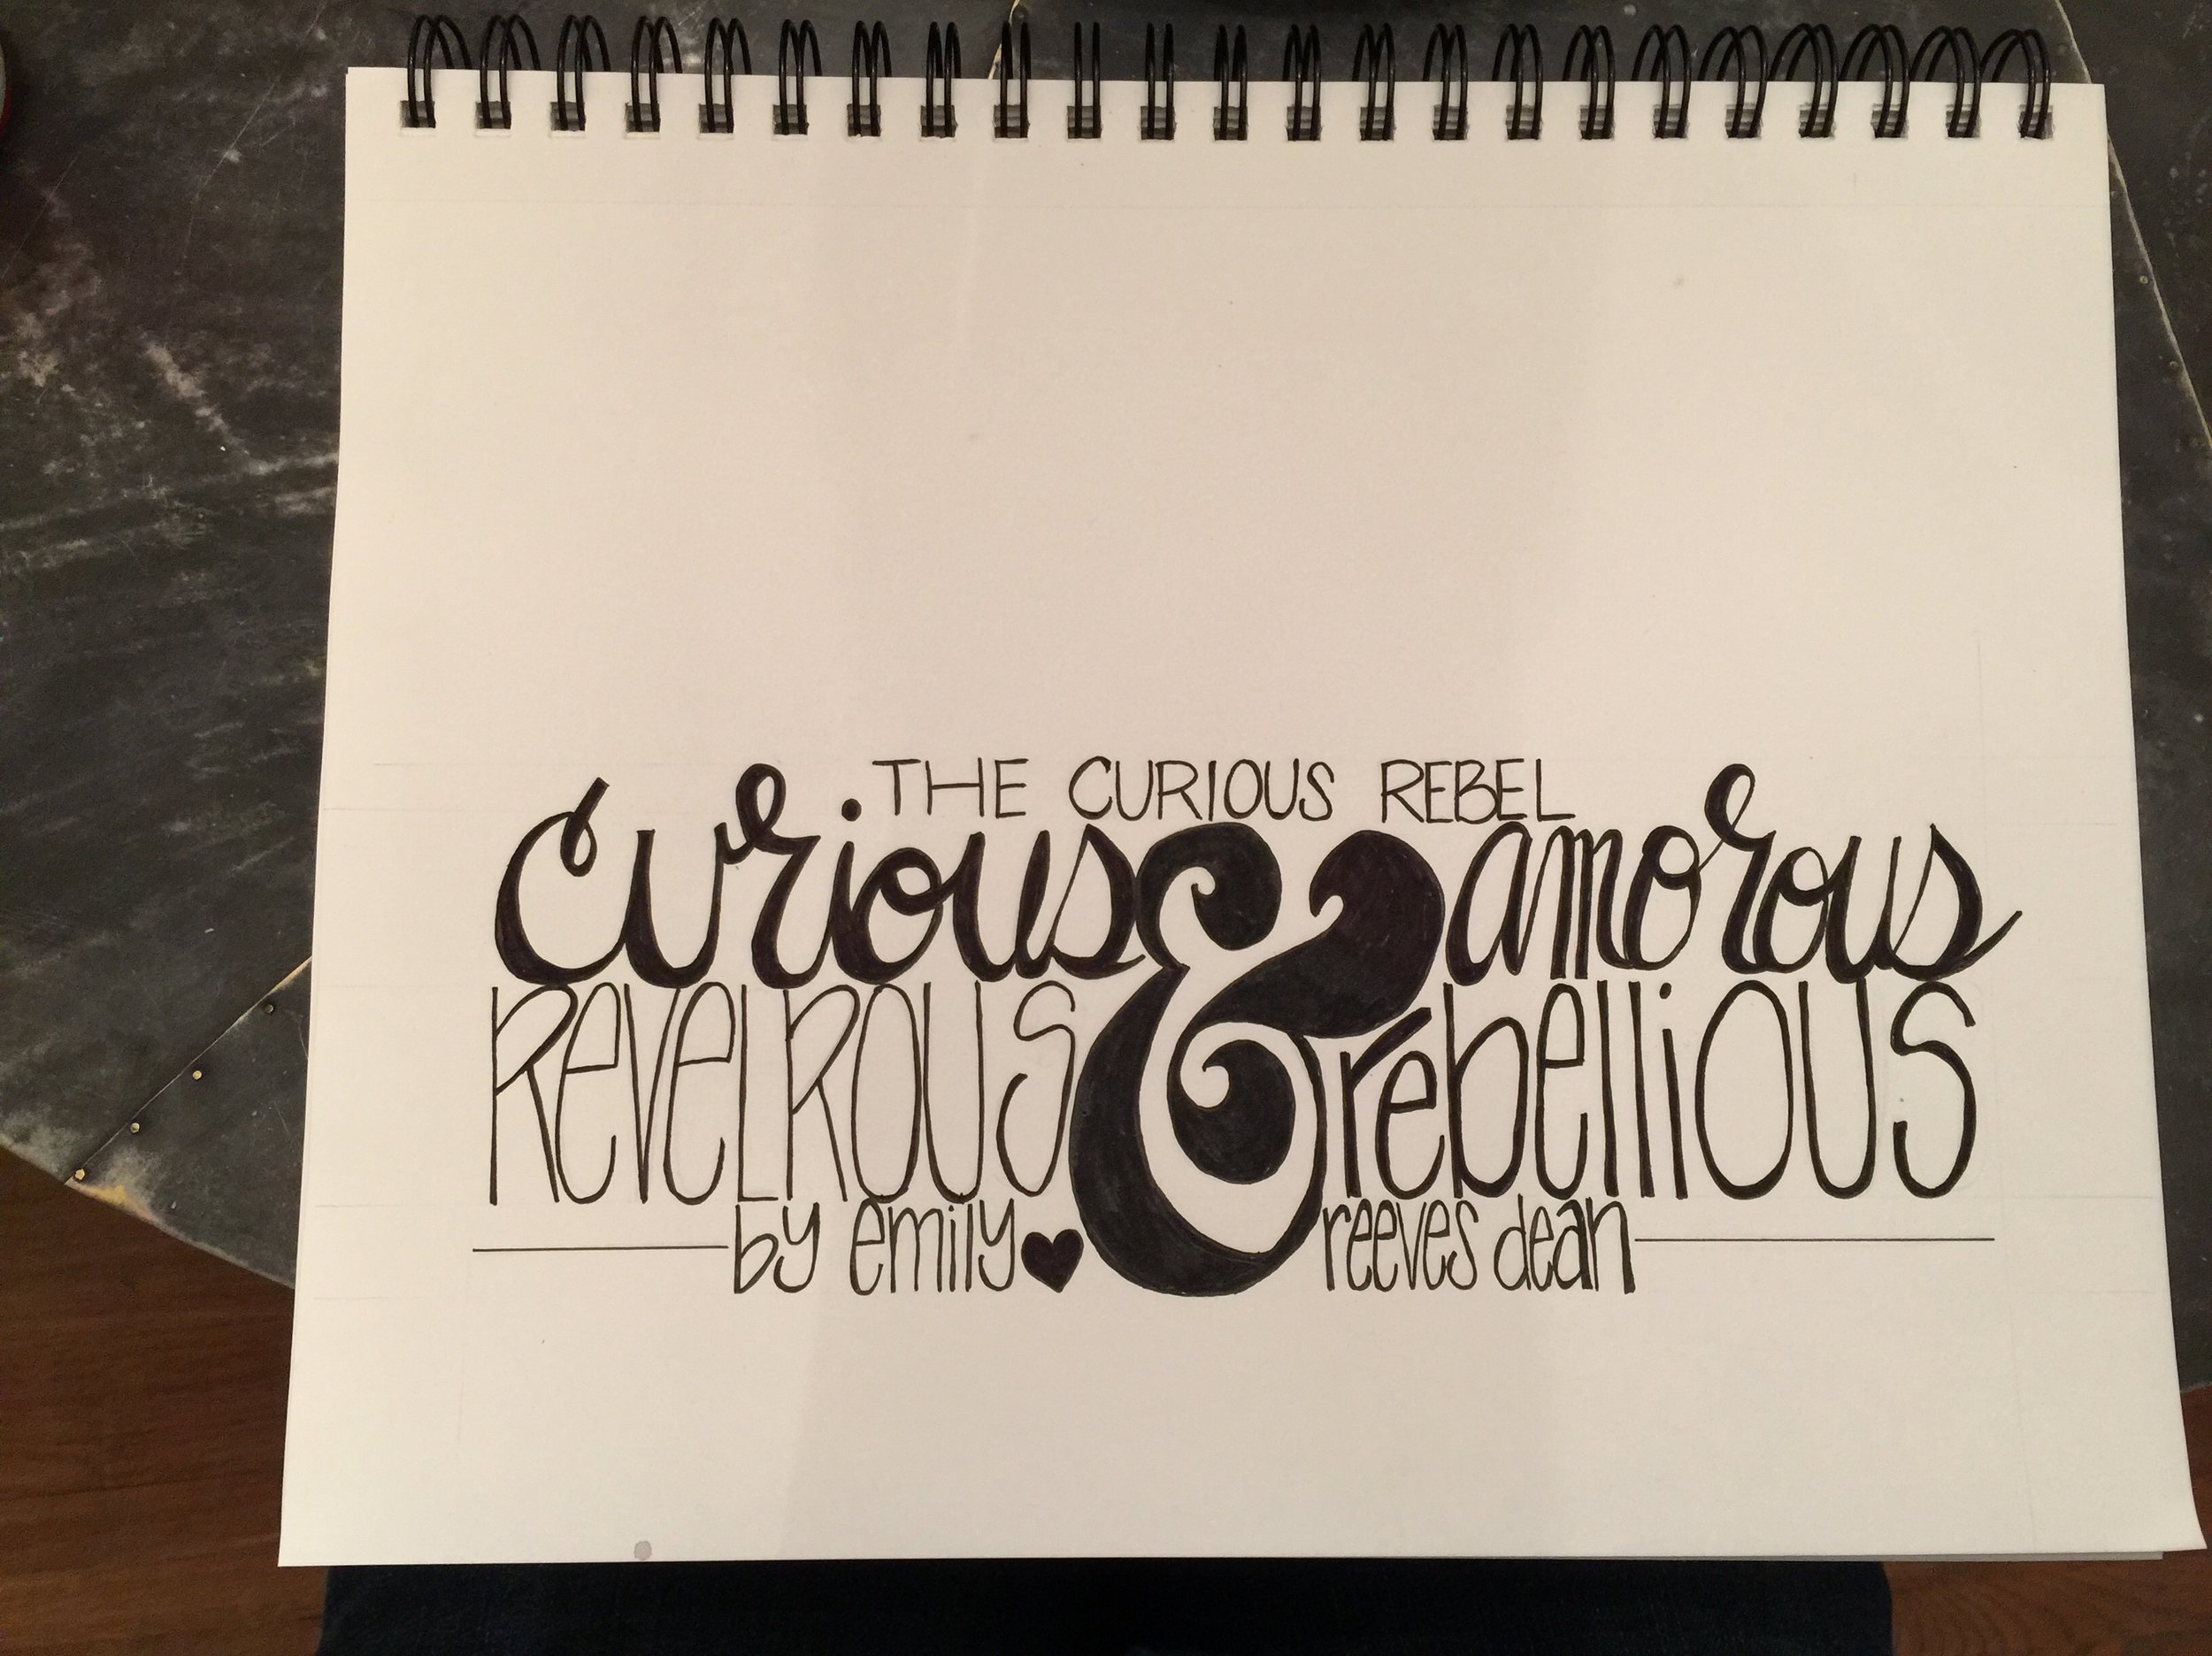 hand lettering by emily reeves that says the curious rebel